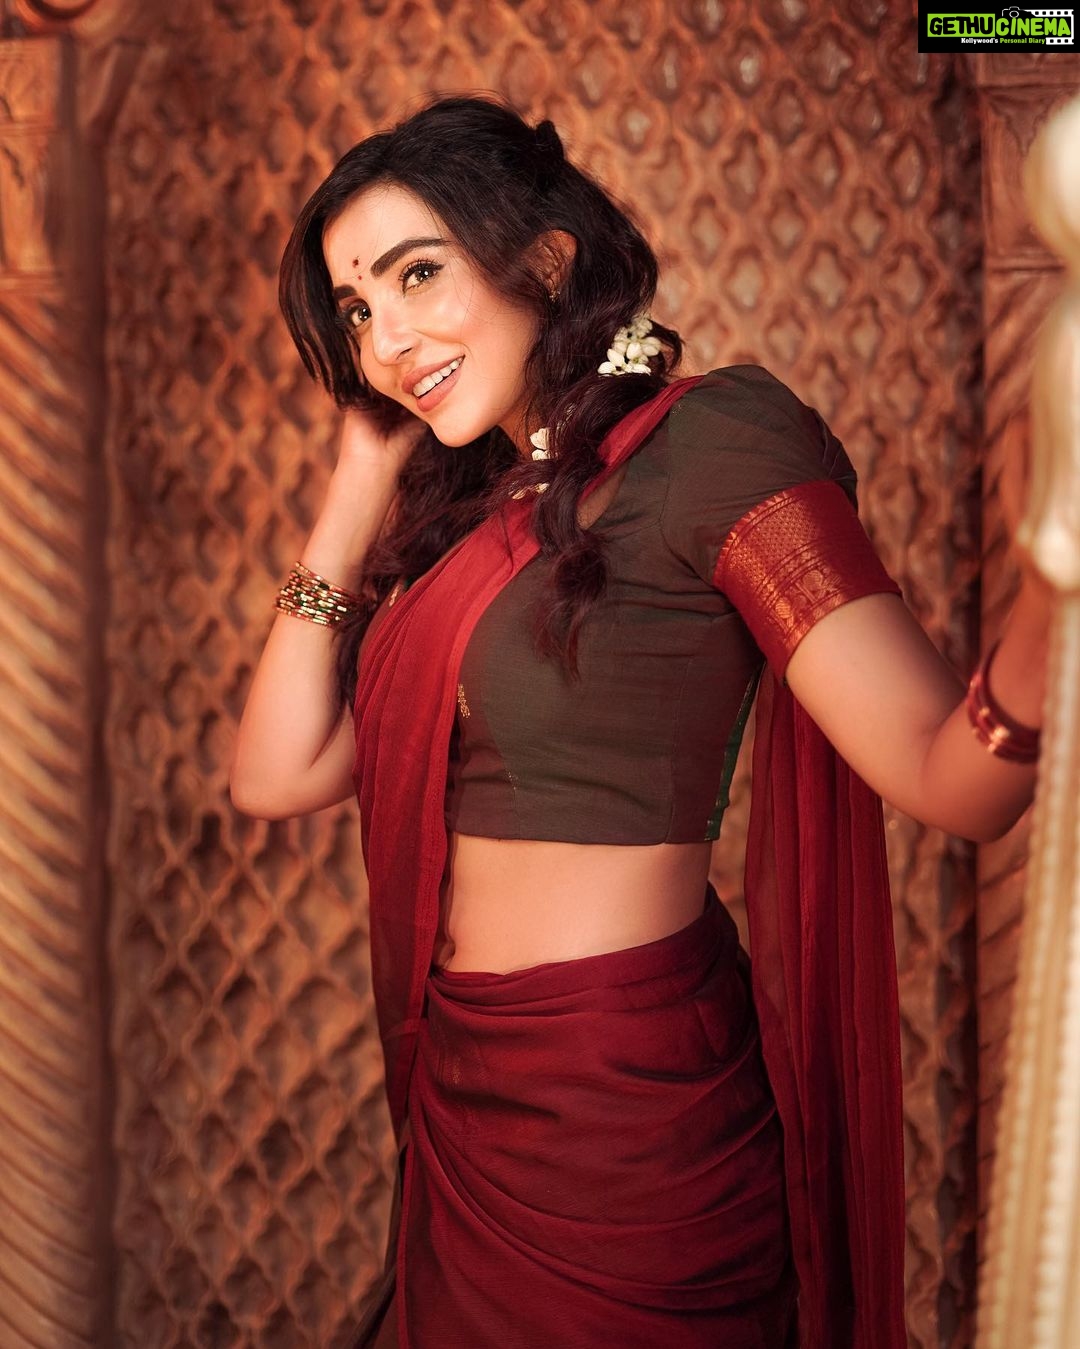 Parvatii Nair - 84K Likes - Most Liked Instagram Photos